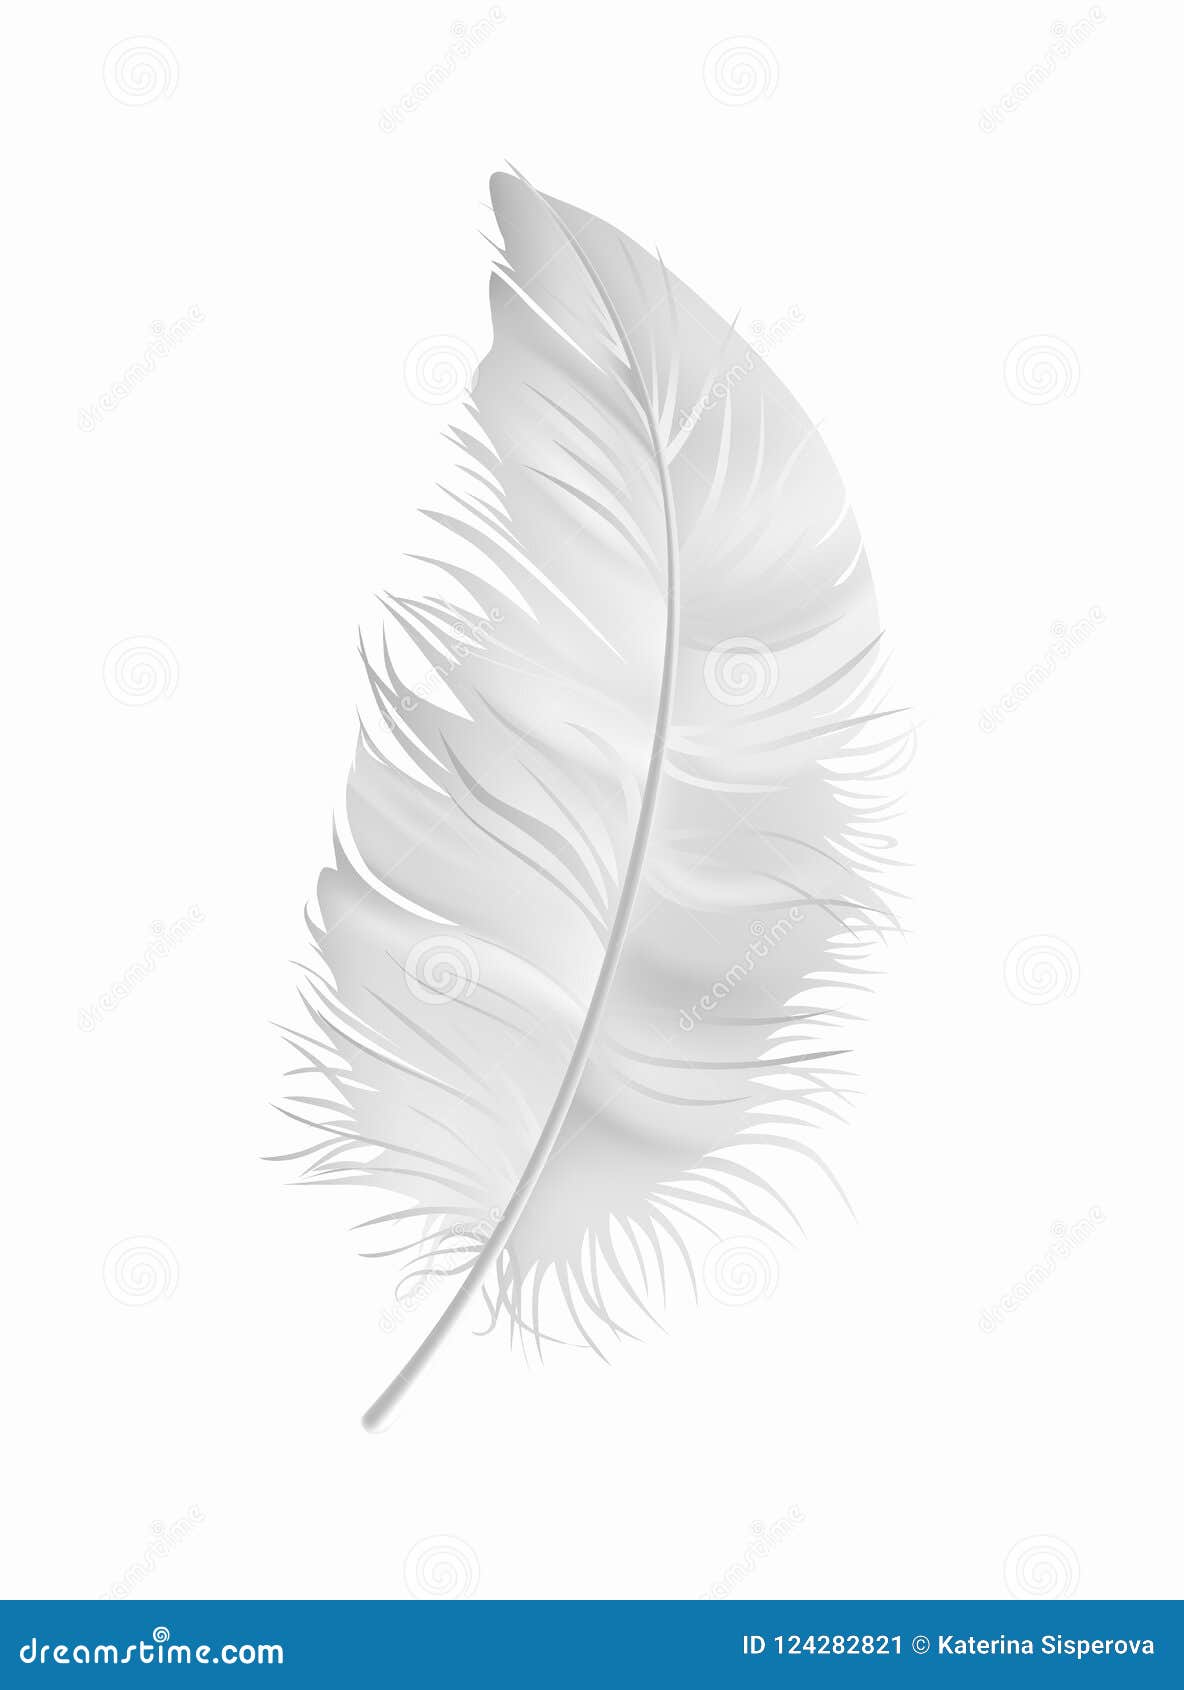 Download Vector White Fluffy Feather Isolated On White Background ...